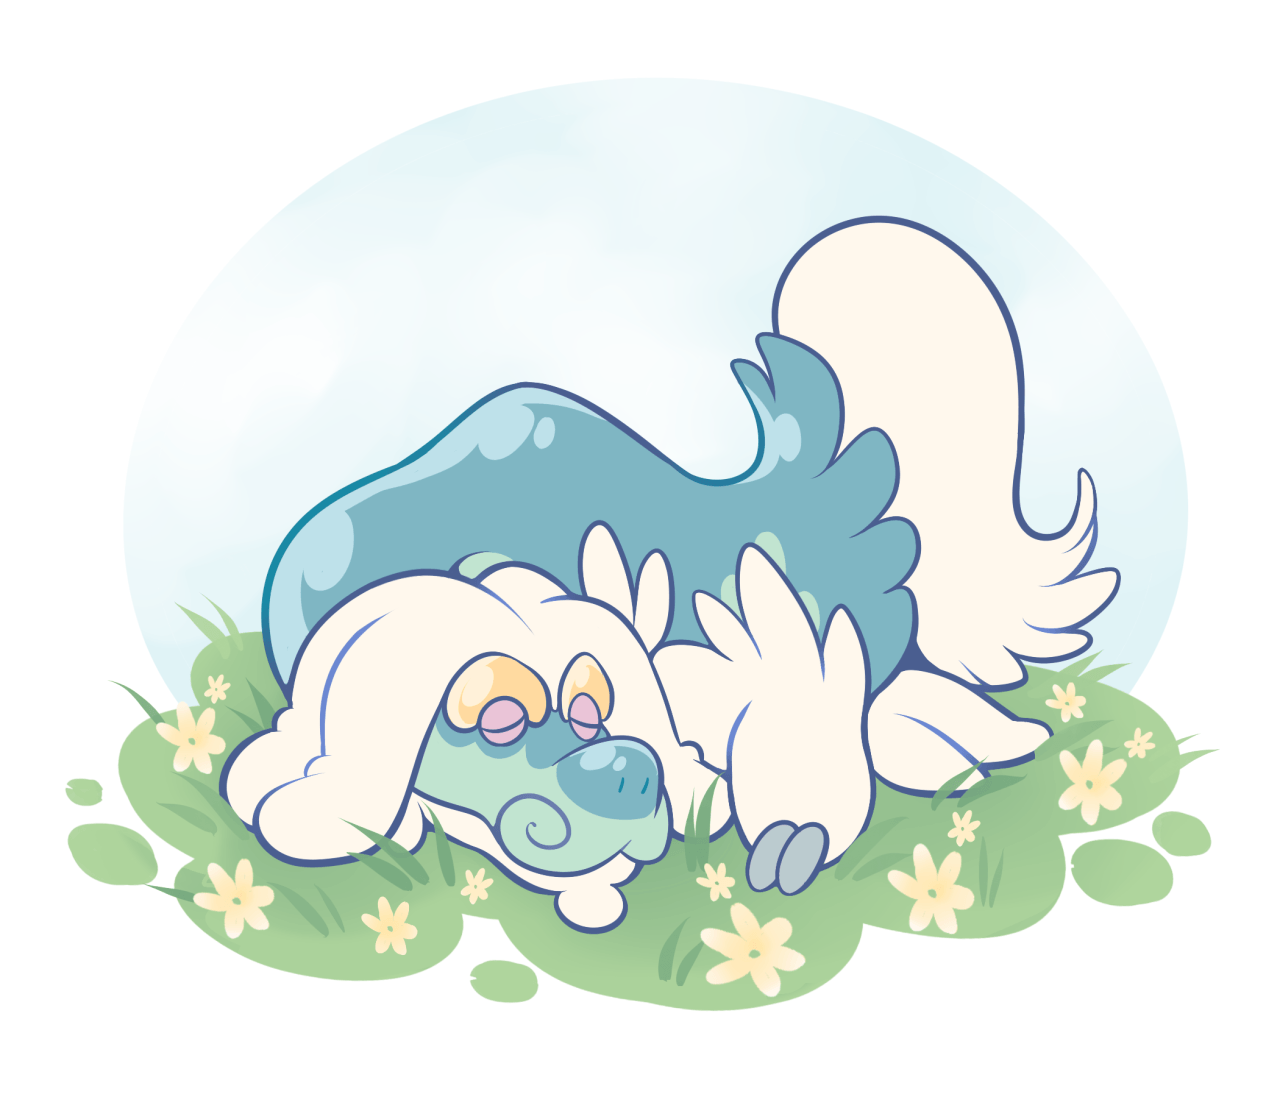 Drampa from Pokémon Sun and Moon. Pocket Monsters